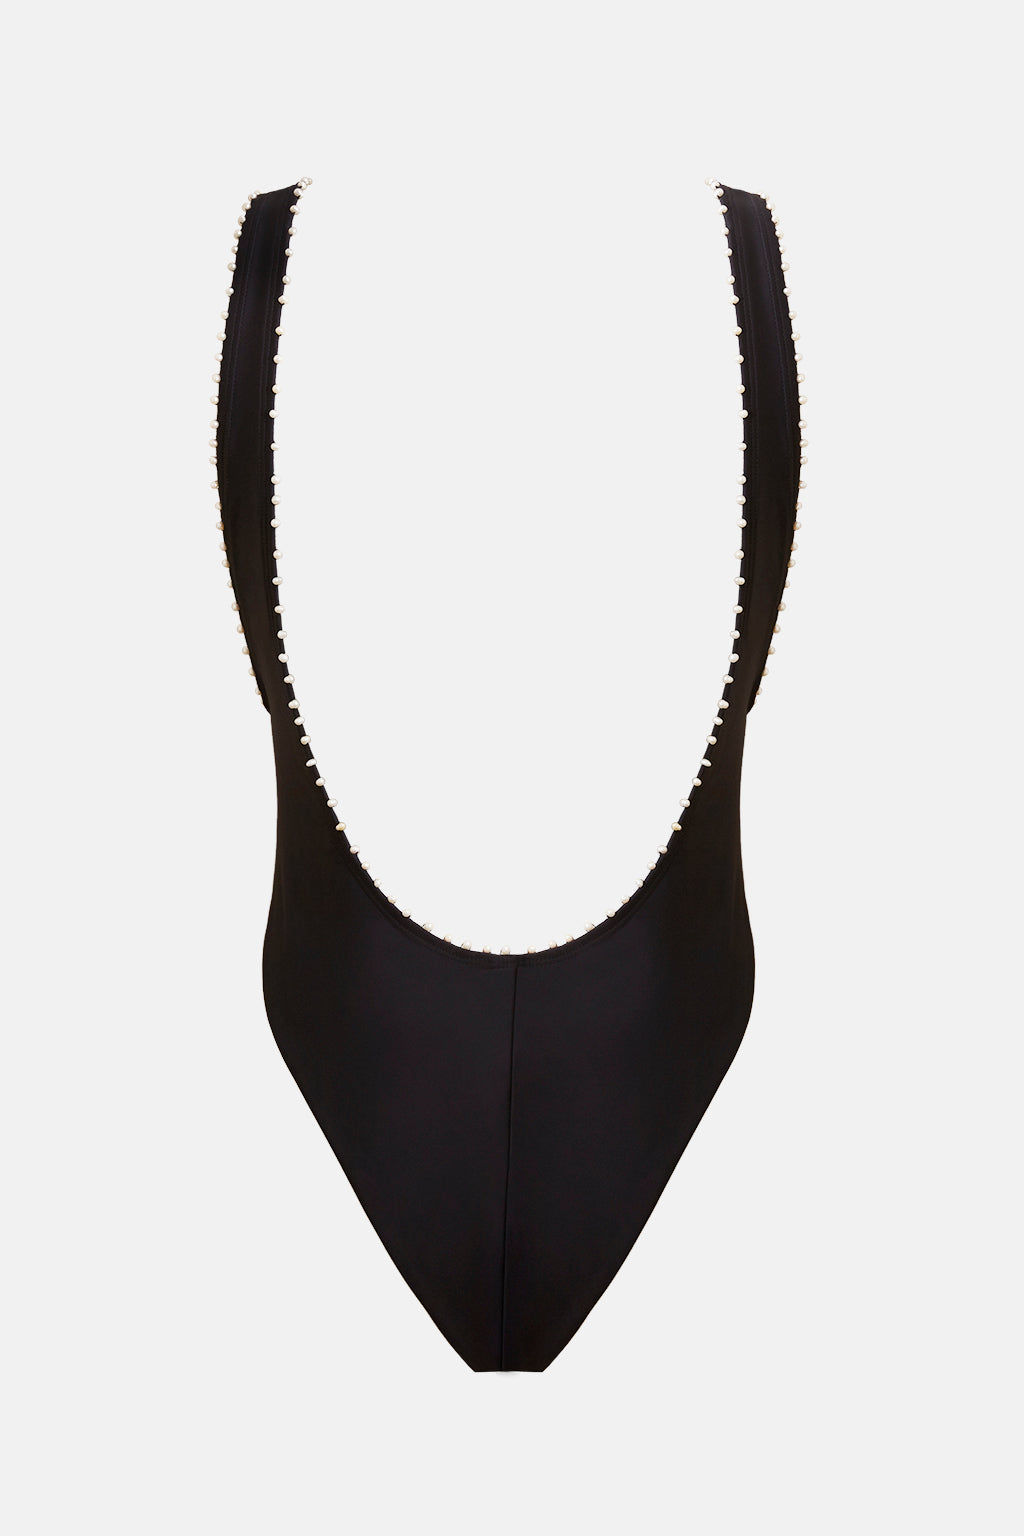 THE MEL MAILLOT BLACK ONE PIECE SWIMSUIT WITH PEARLS SUSTAINABLE BATHING SUIT LUXURY DESIGNER SWIMWEAR